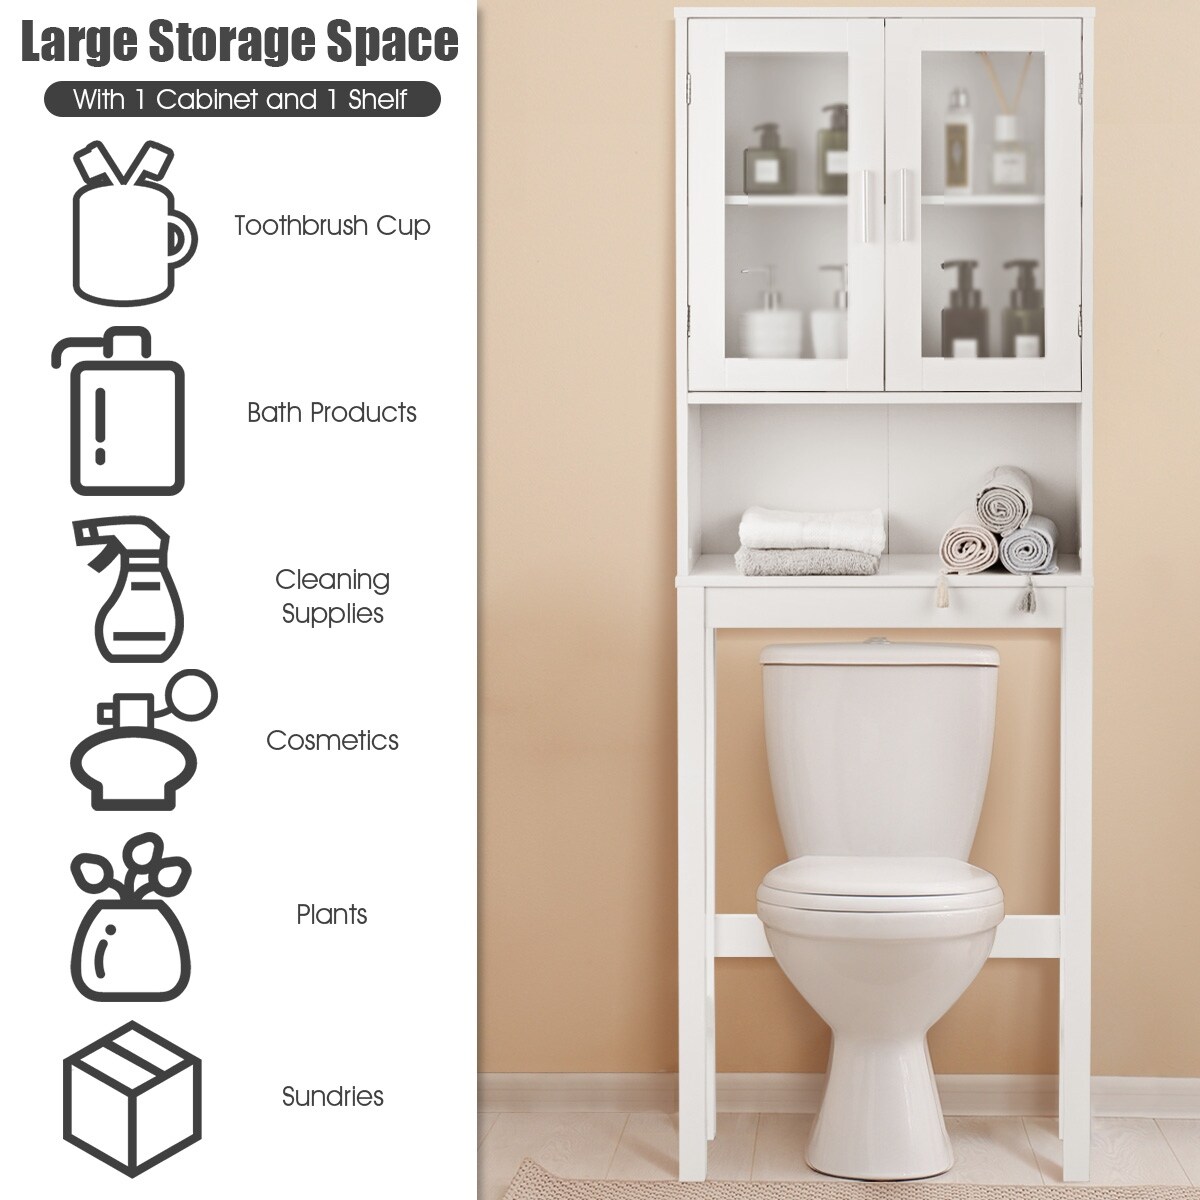 https://ak1.ostkcdn.com/images/products/is/images/direct/5ac85663fcbcb0dd48e84d78771bf4d2eb2f0e01/Costway-Wooden-Over-The-Toilet-Storage-Cabinet-Spacesaver-Organizer.jpg